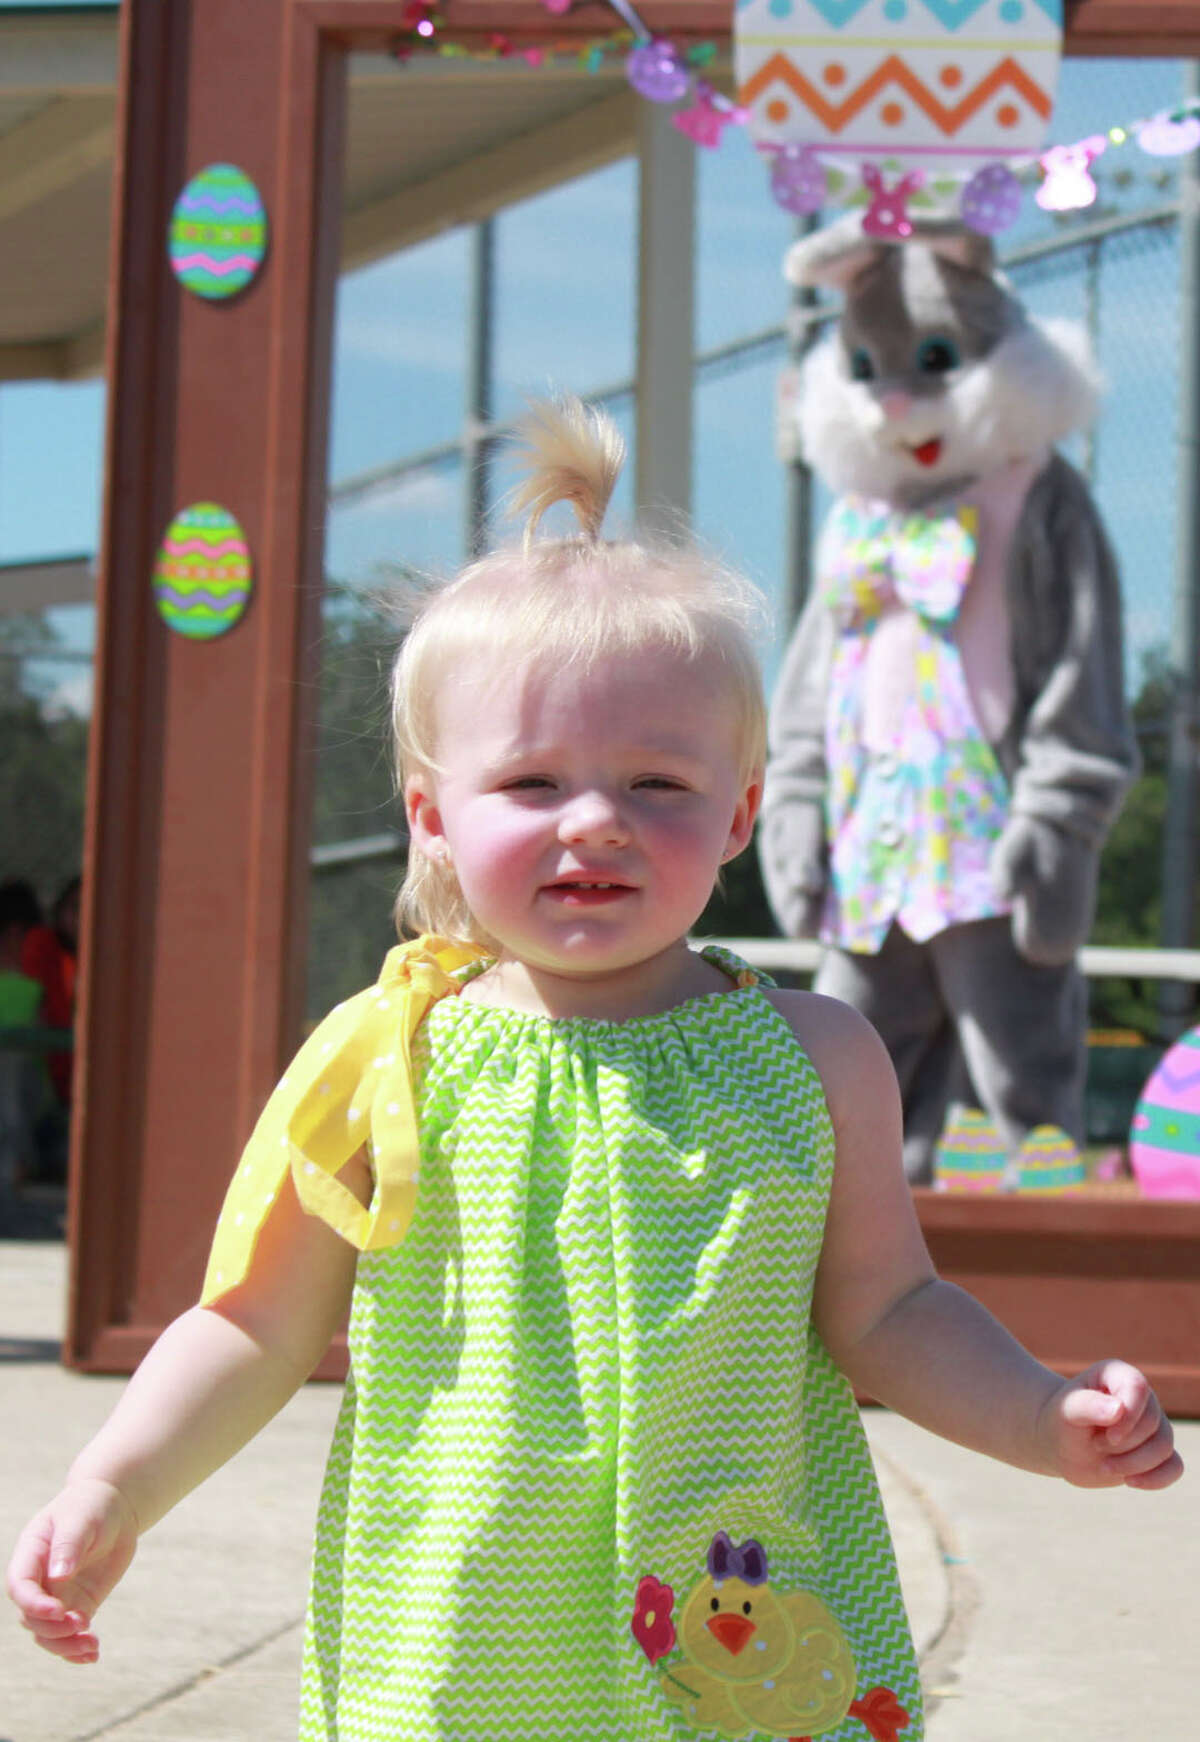 Skylar Morrison, 1, of Conroe took a trip to Carl Barton Jr. Softball Fields of Conroe Saturday, where the City of Conroe Parks and Recreation Department hosted the annual Morning with Mr. Bunny.